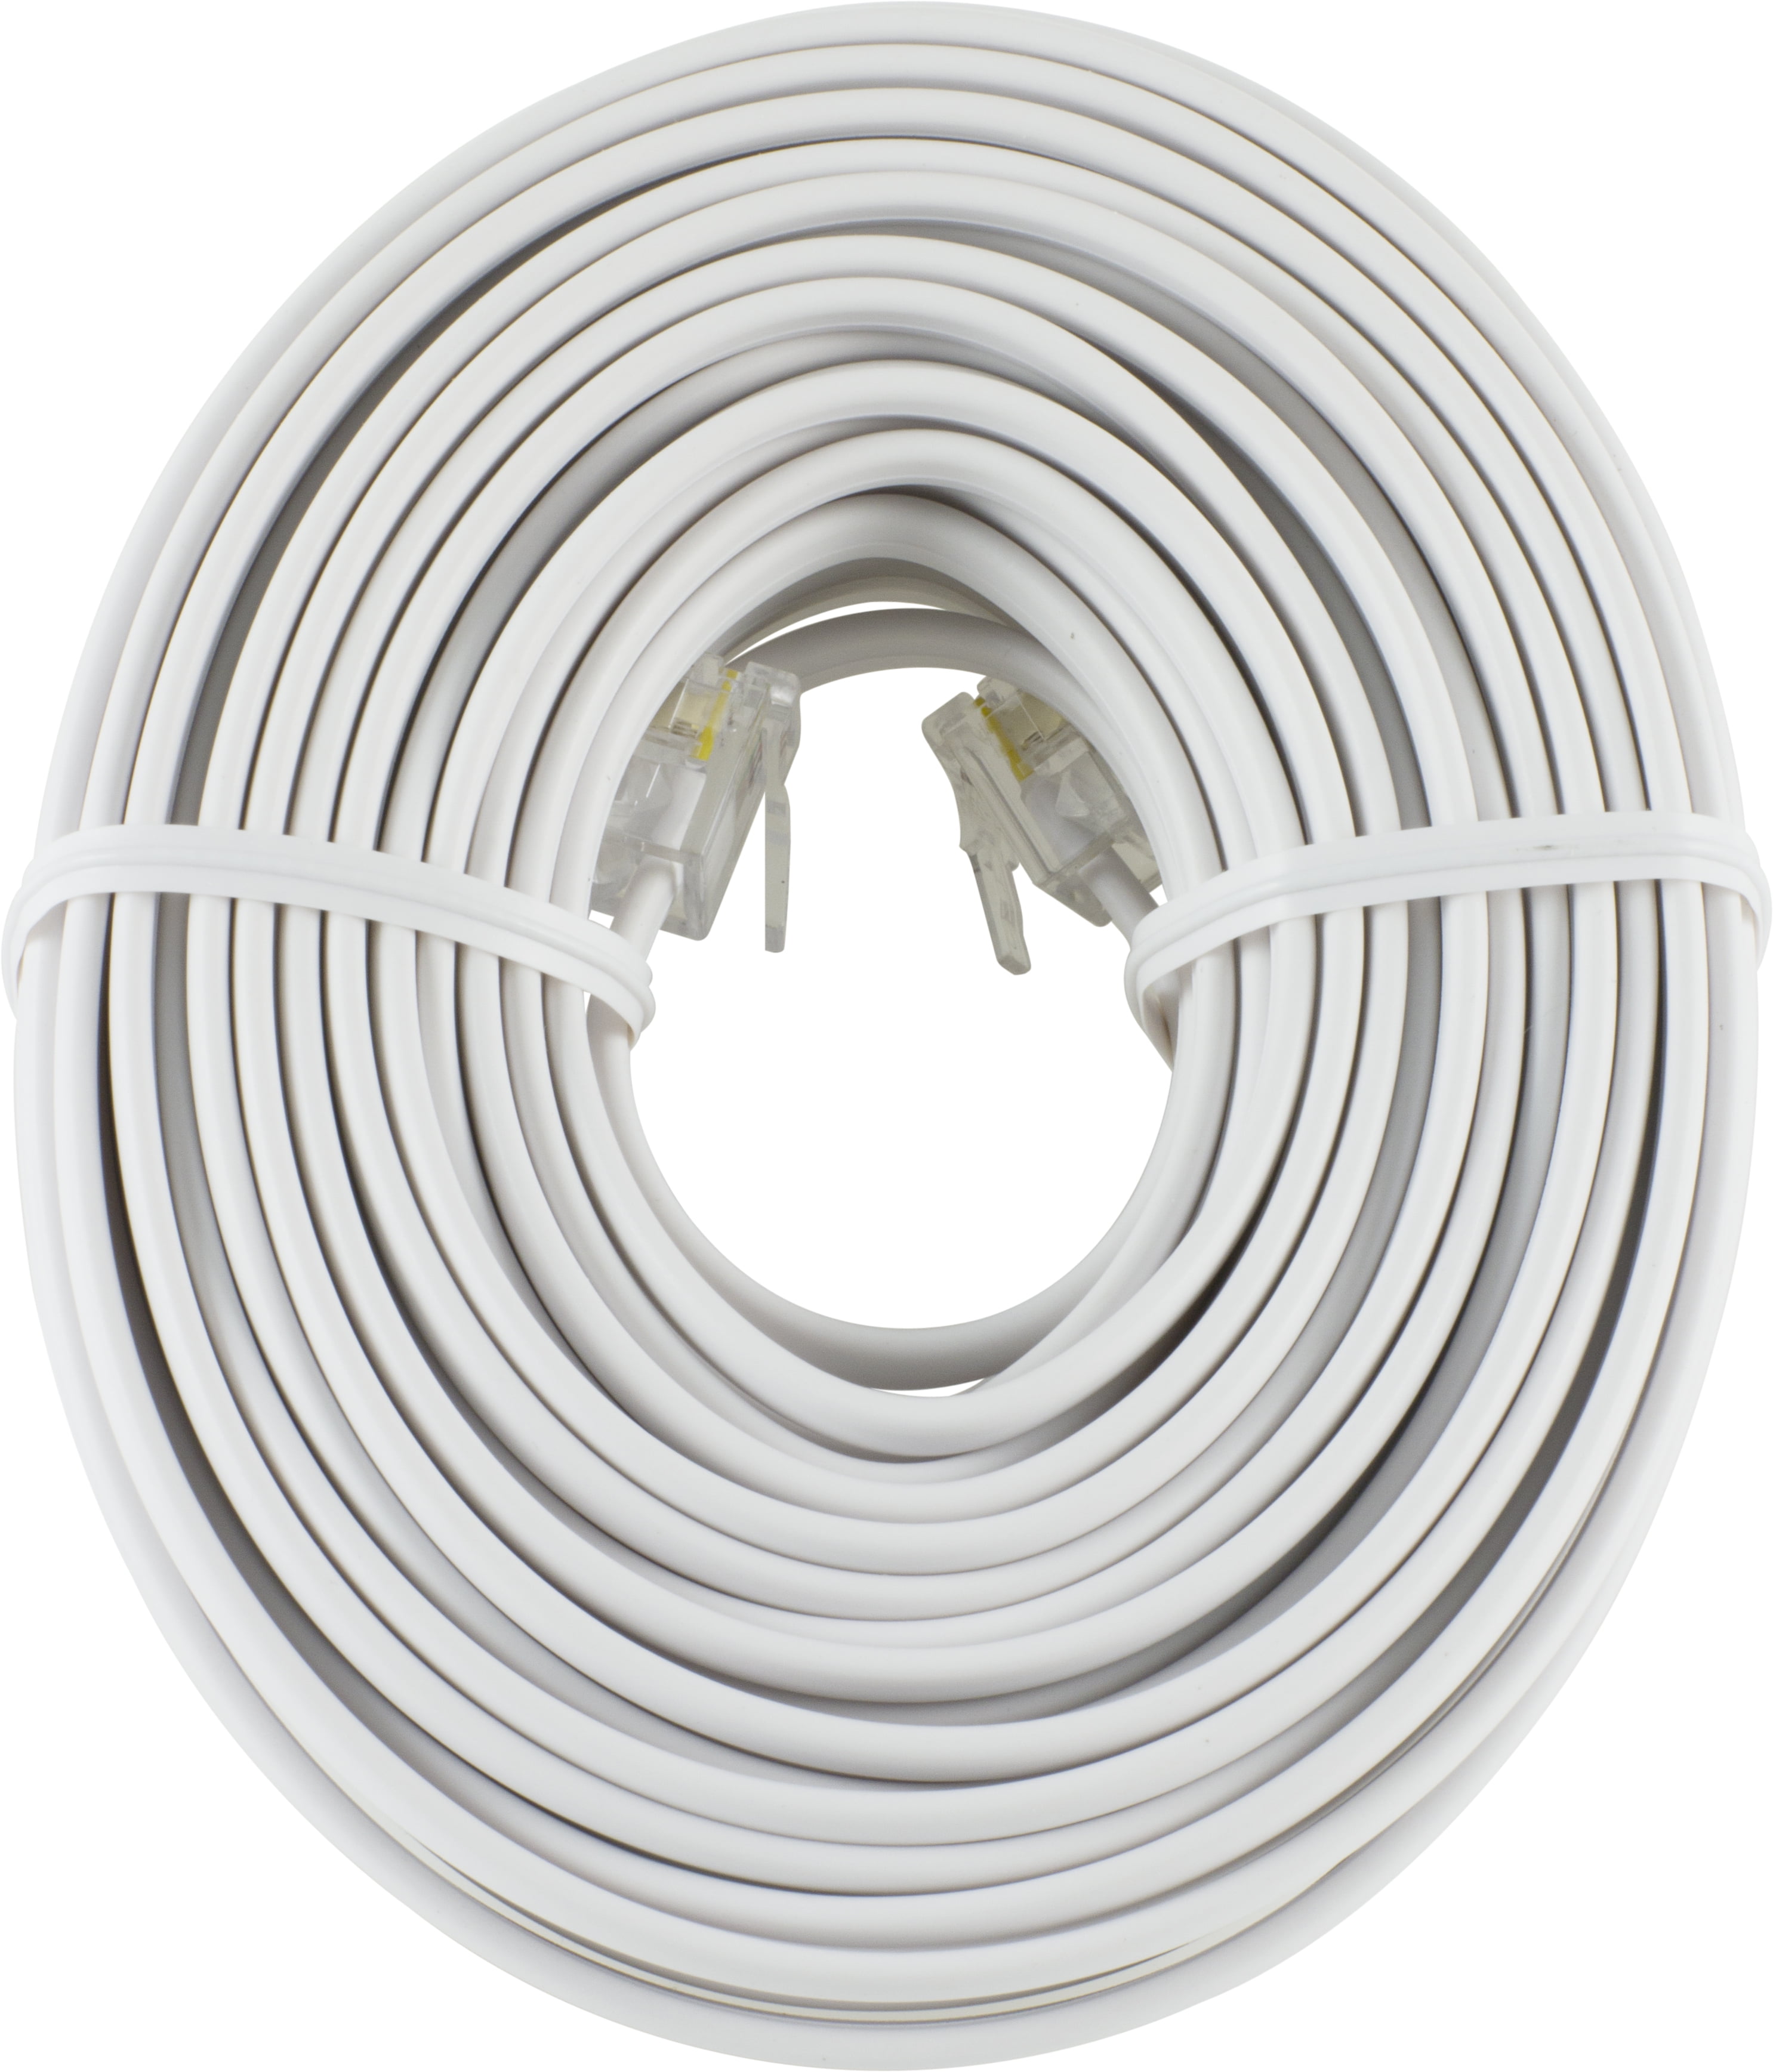 50FT feet RJ11 6P4C Modular Telephone Extension Cable Phone Cord Line Wire White 